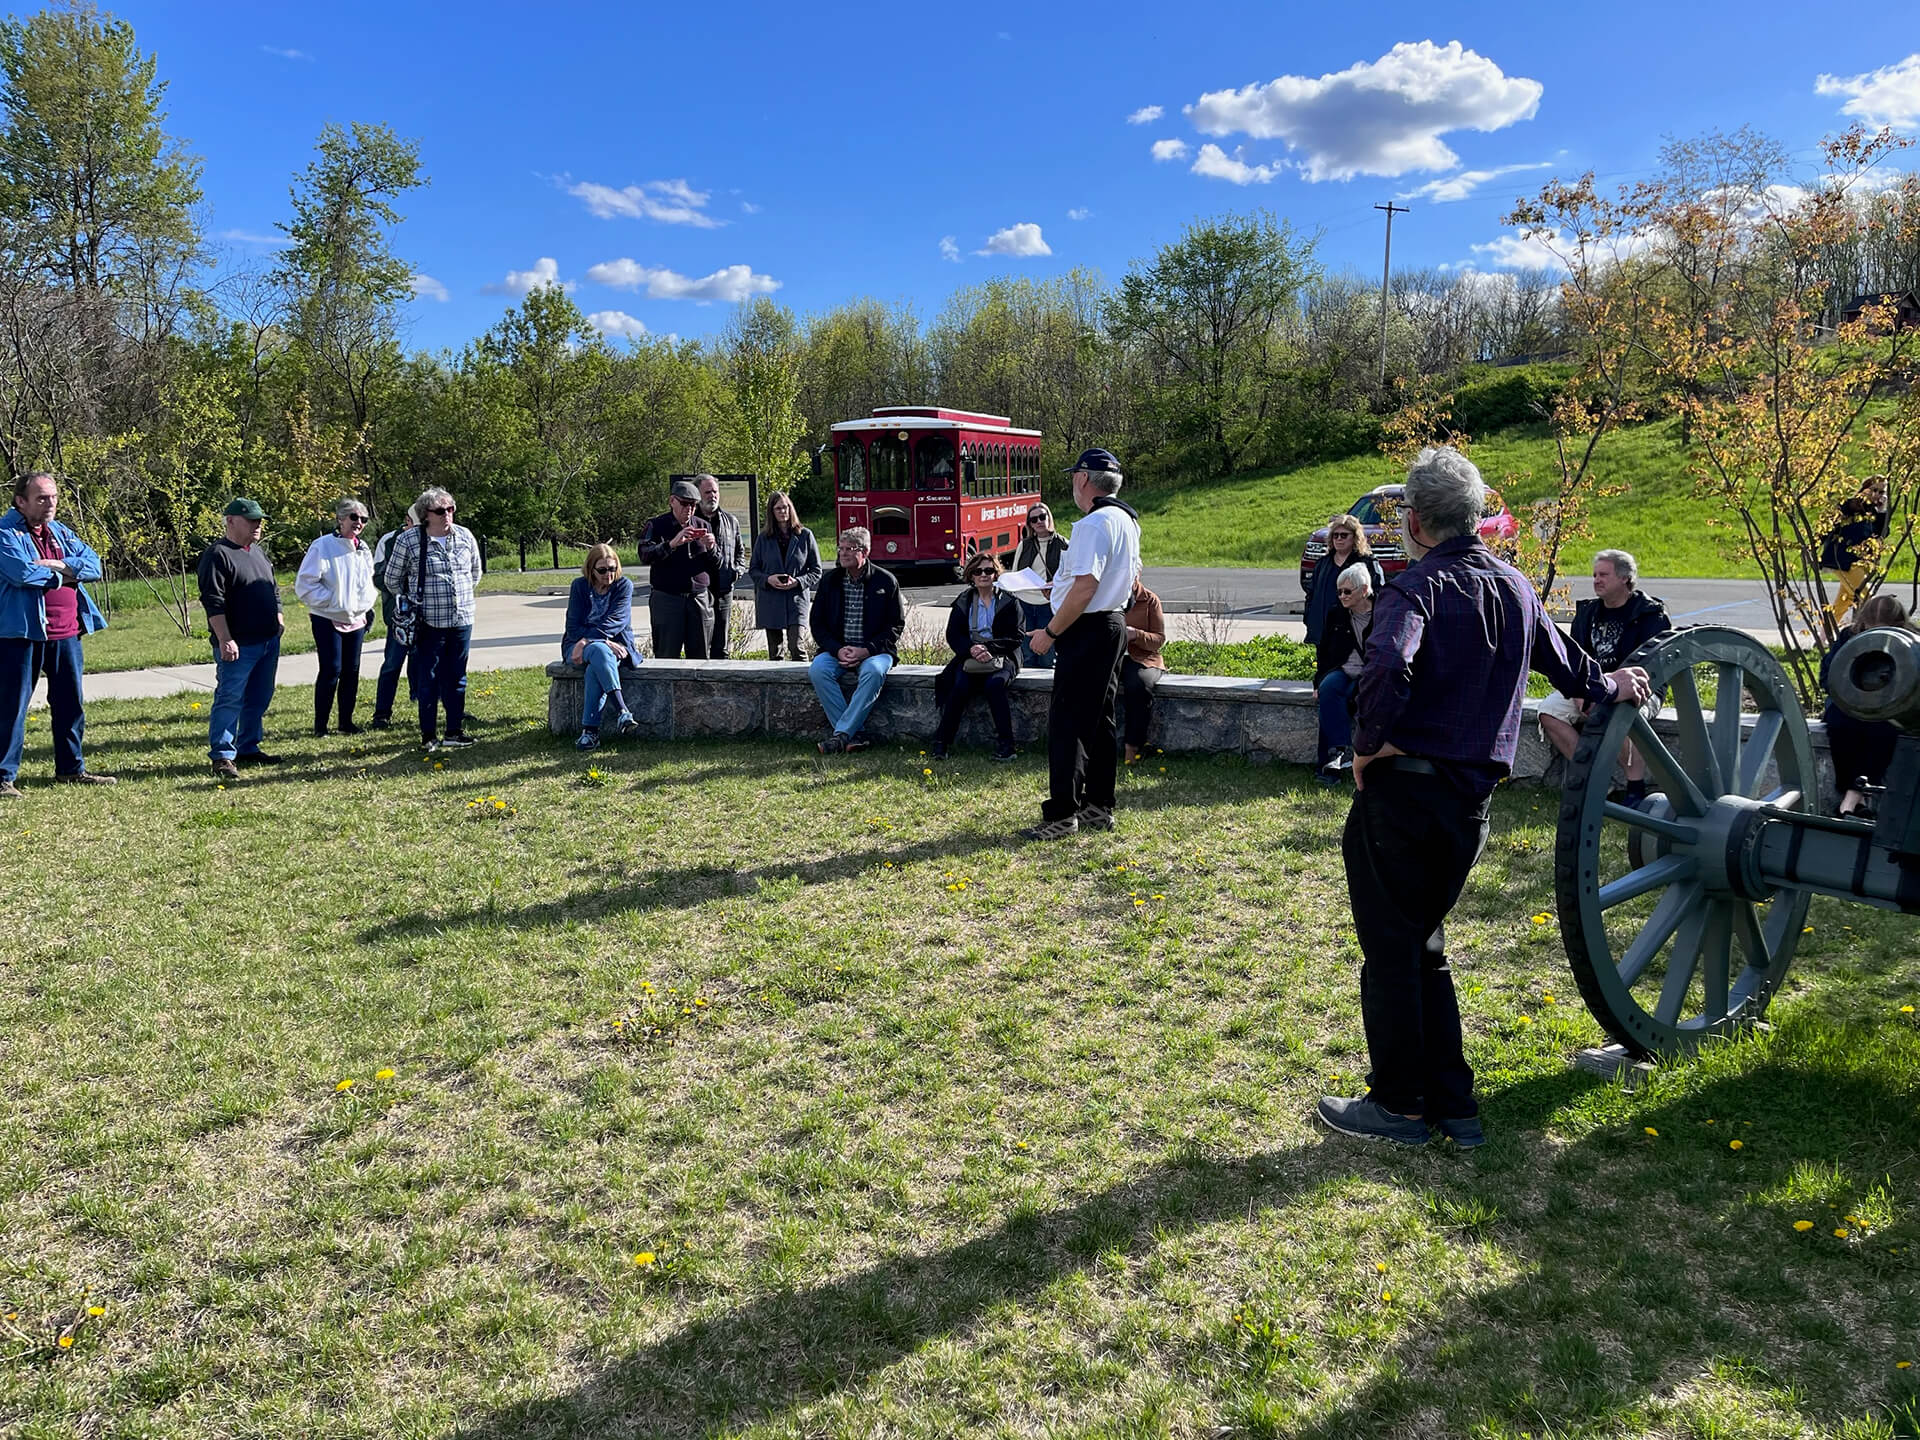 A group gathered at a historic site listening to a tour guide with a trolley in the background